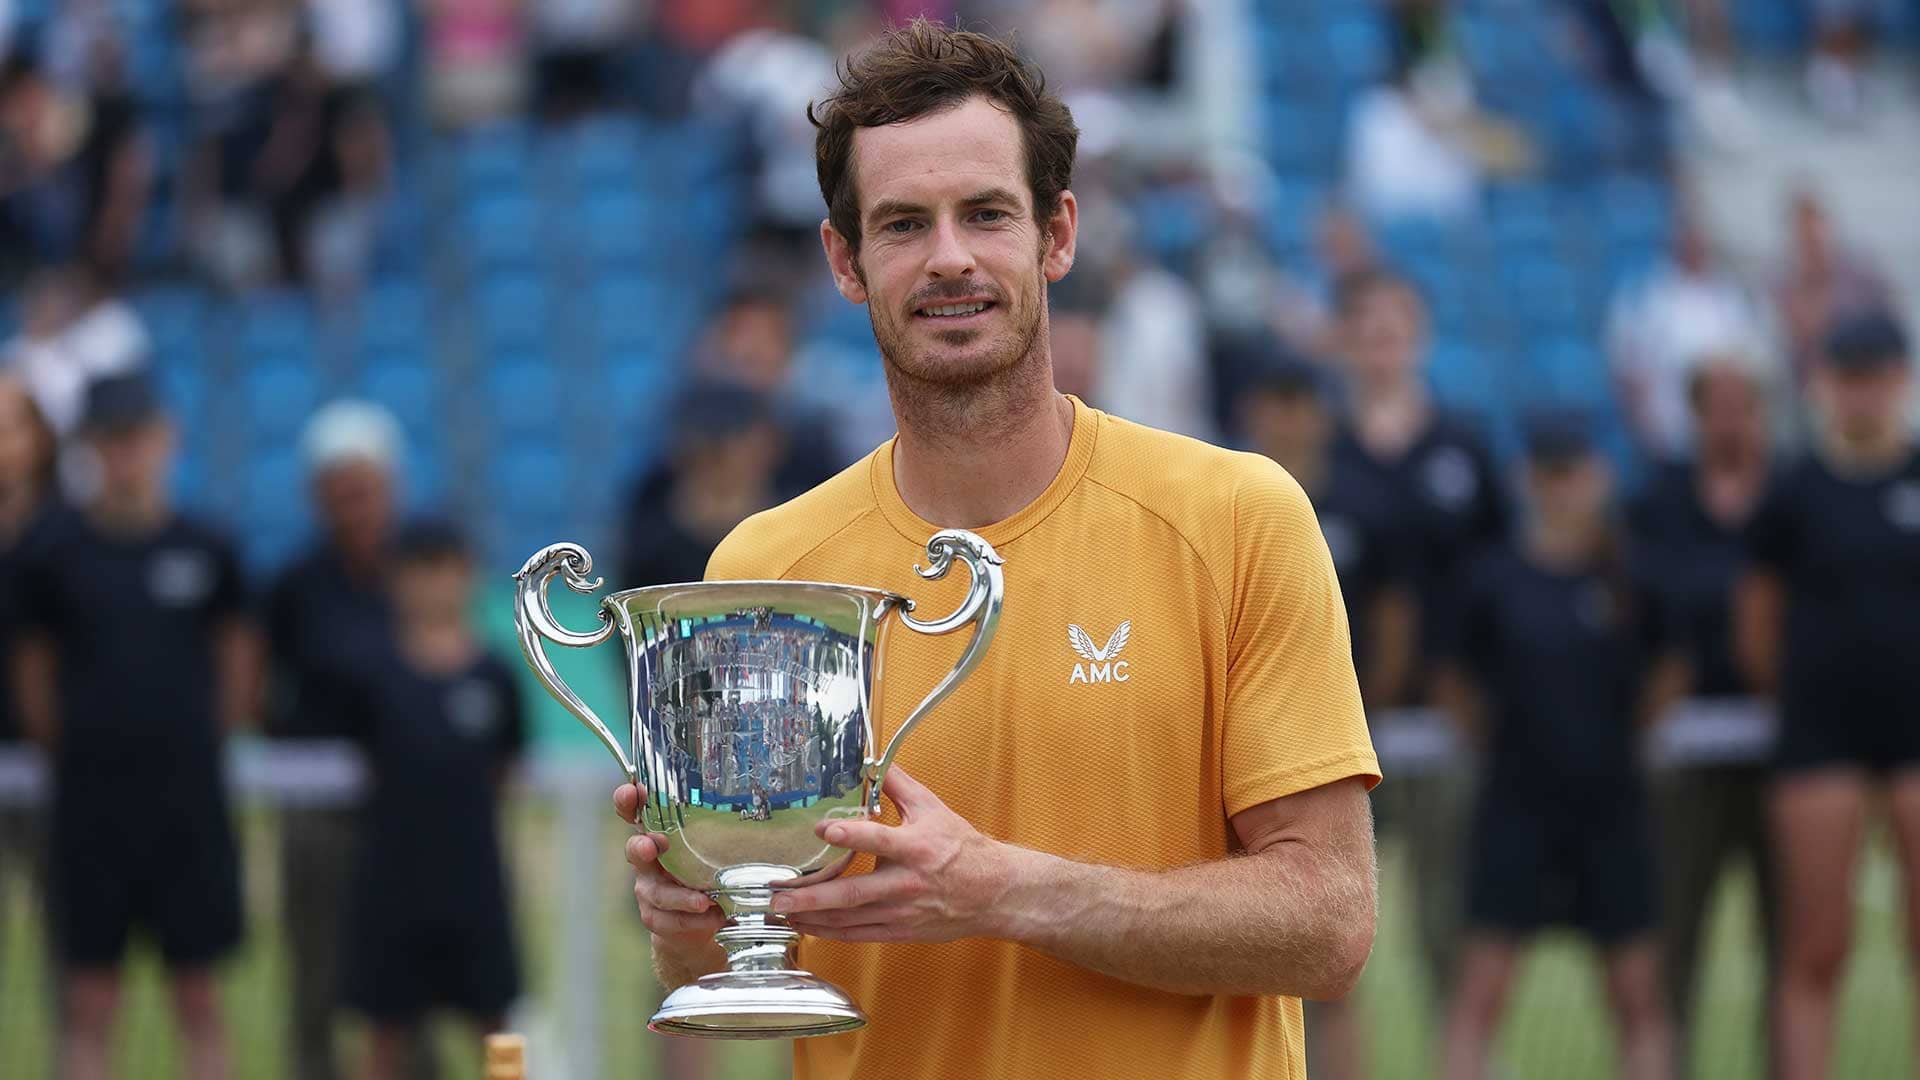 Andy Murray celebrates winning the title in Surbiton.